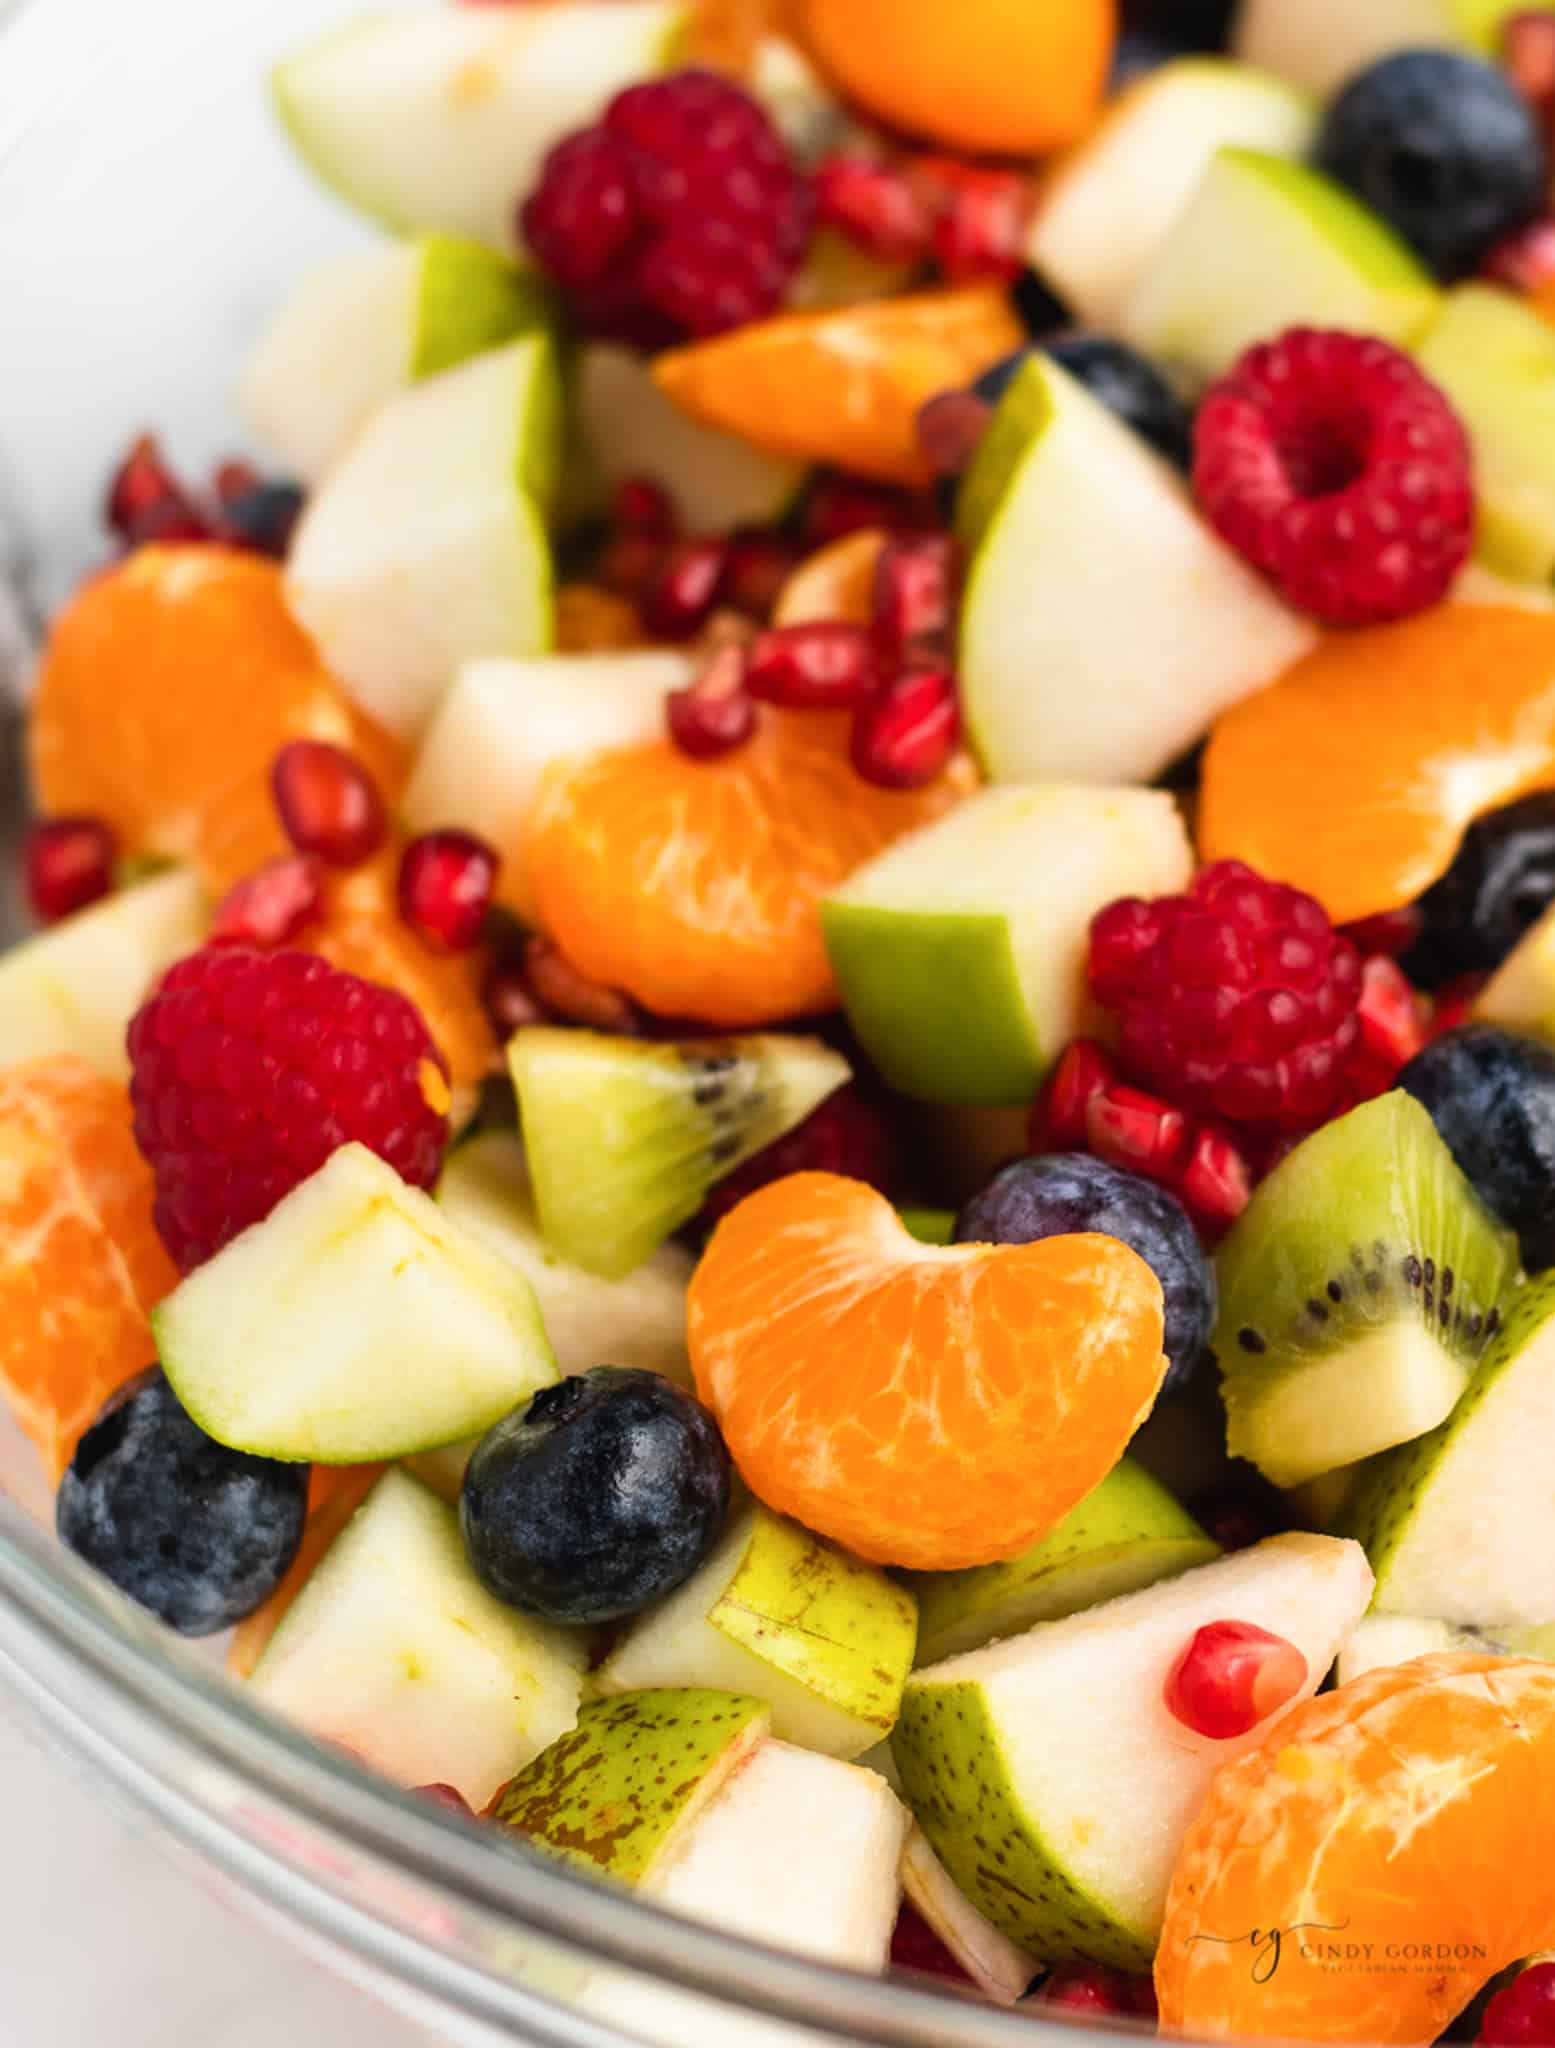 Closeup of Christmas fruit salad made with berries, tangerines, apples and pomegranate seeds